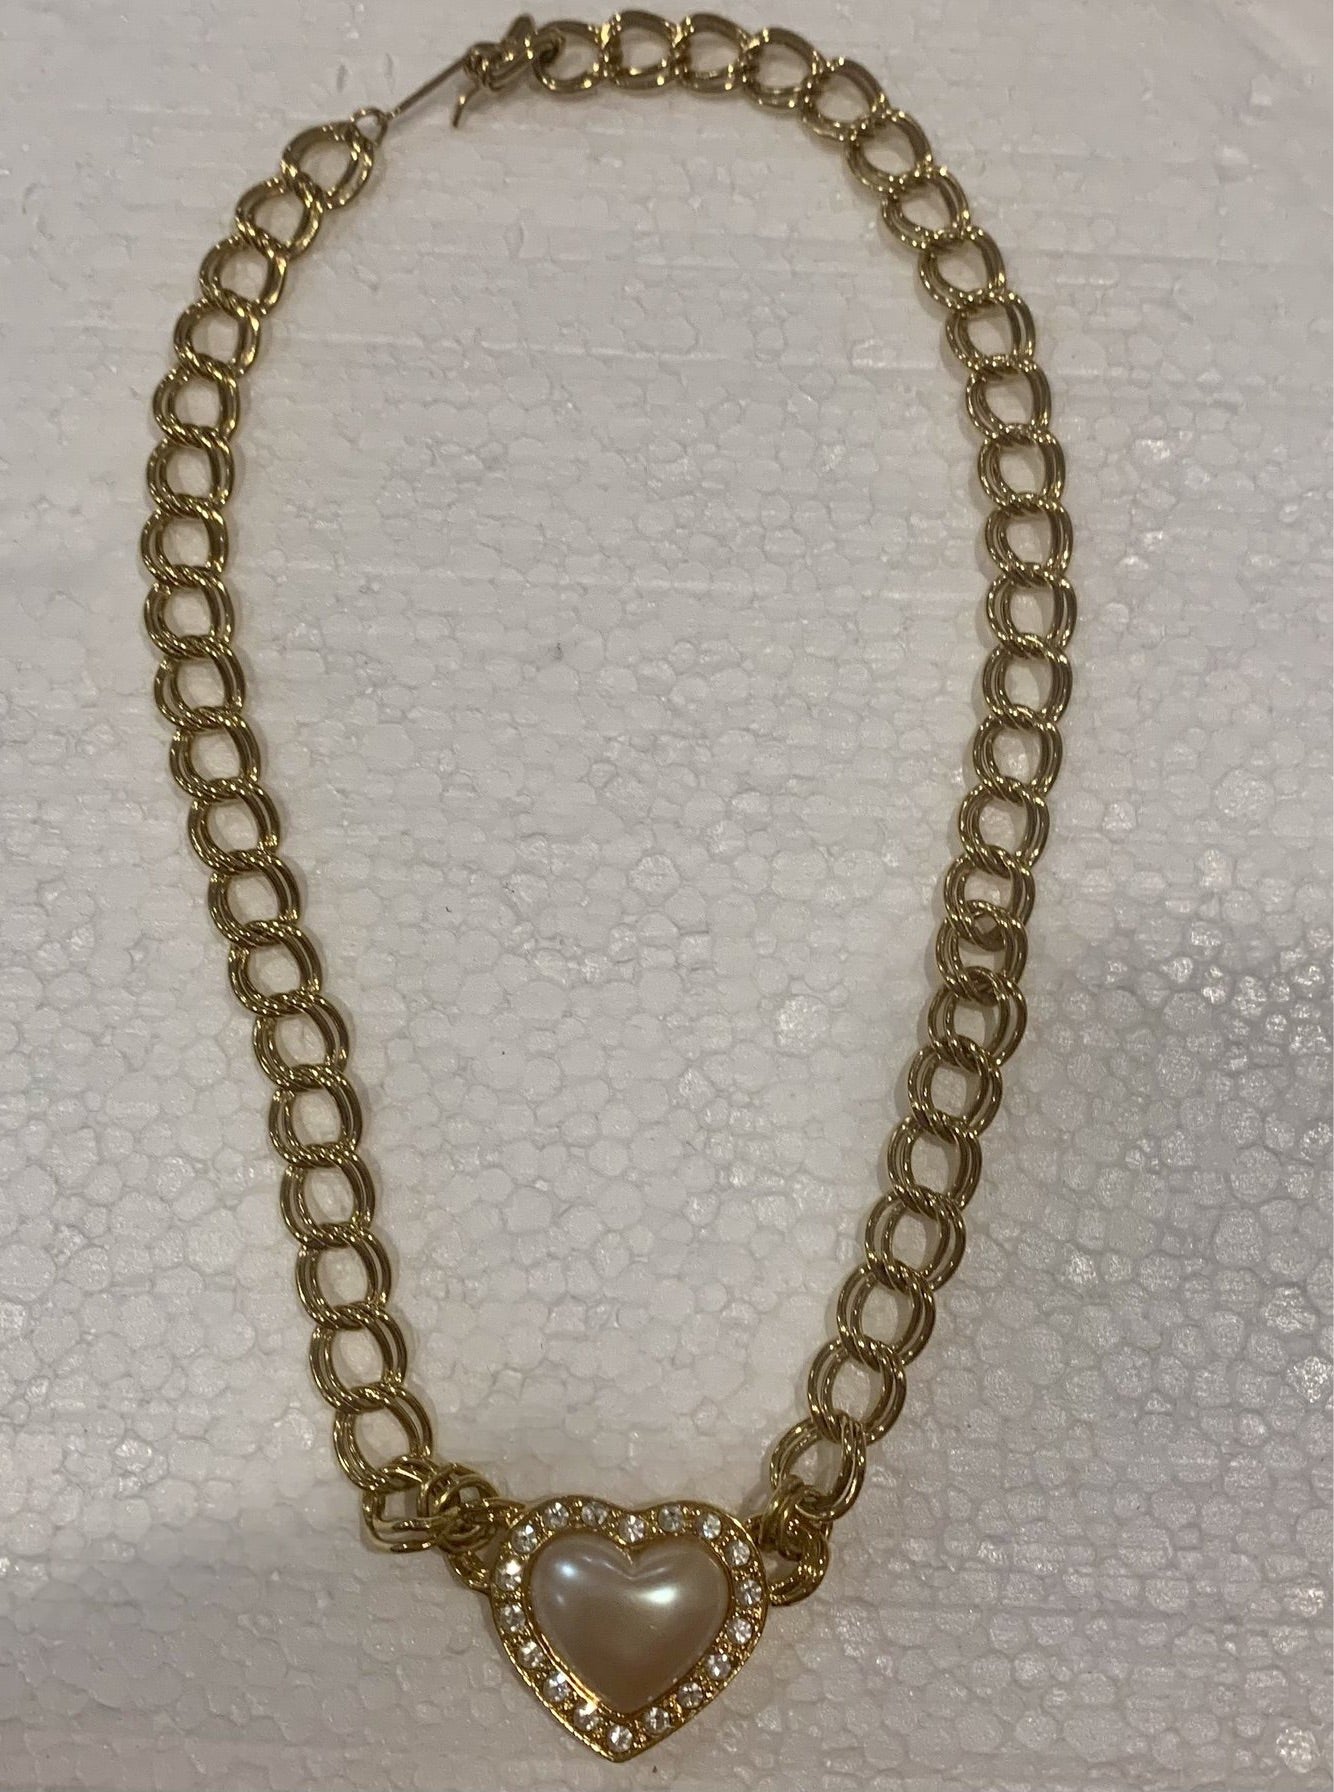 Avon Gold Tone Chain Link Necklace Engraved Pendant Merry Christmas Class  of 77